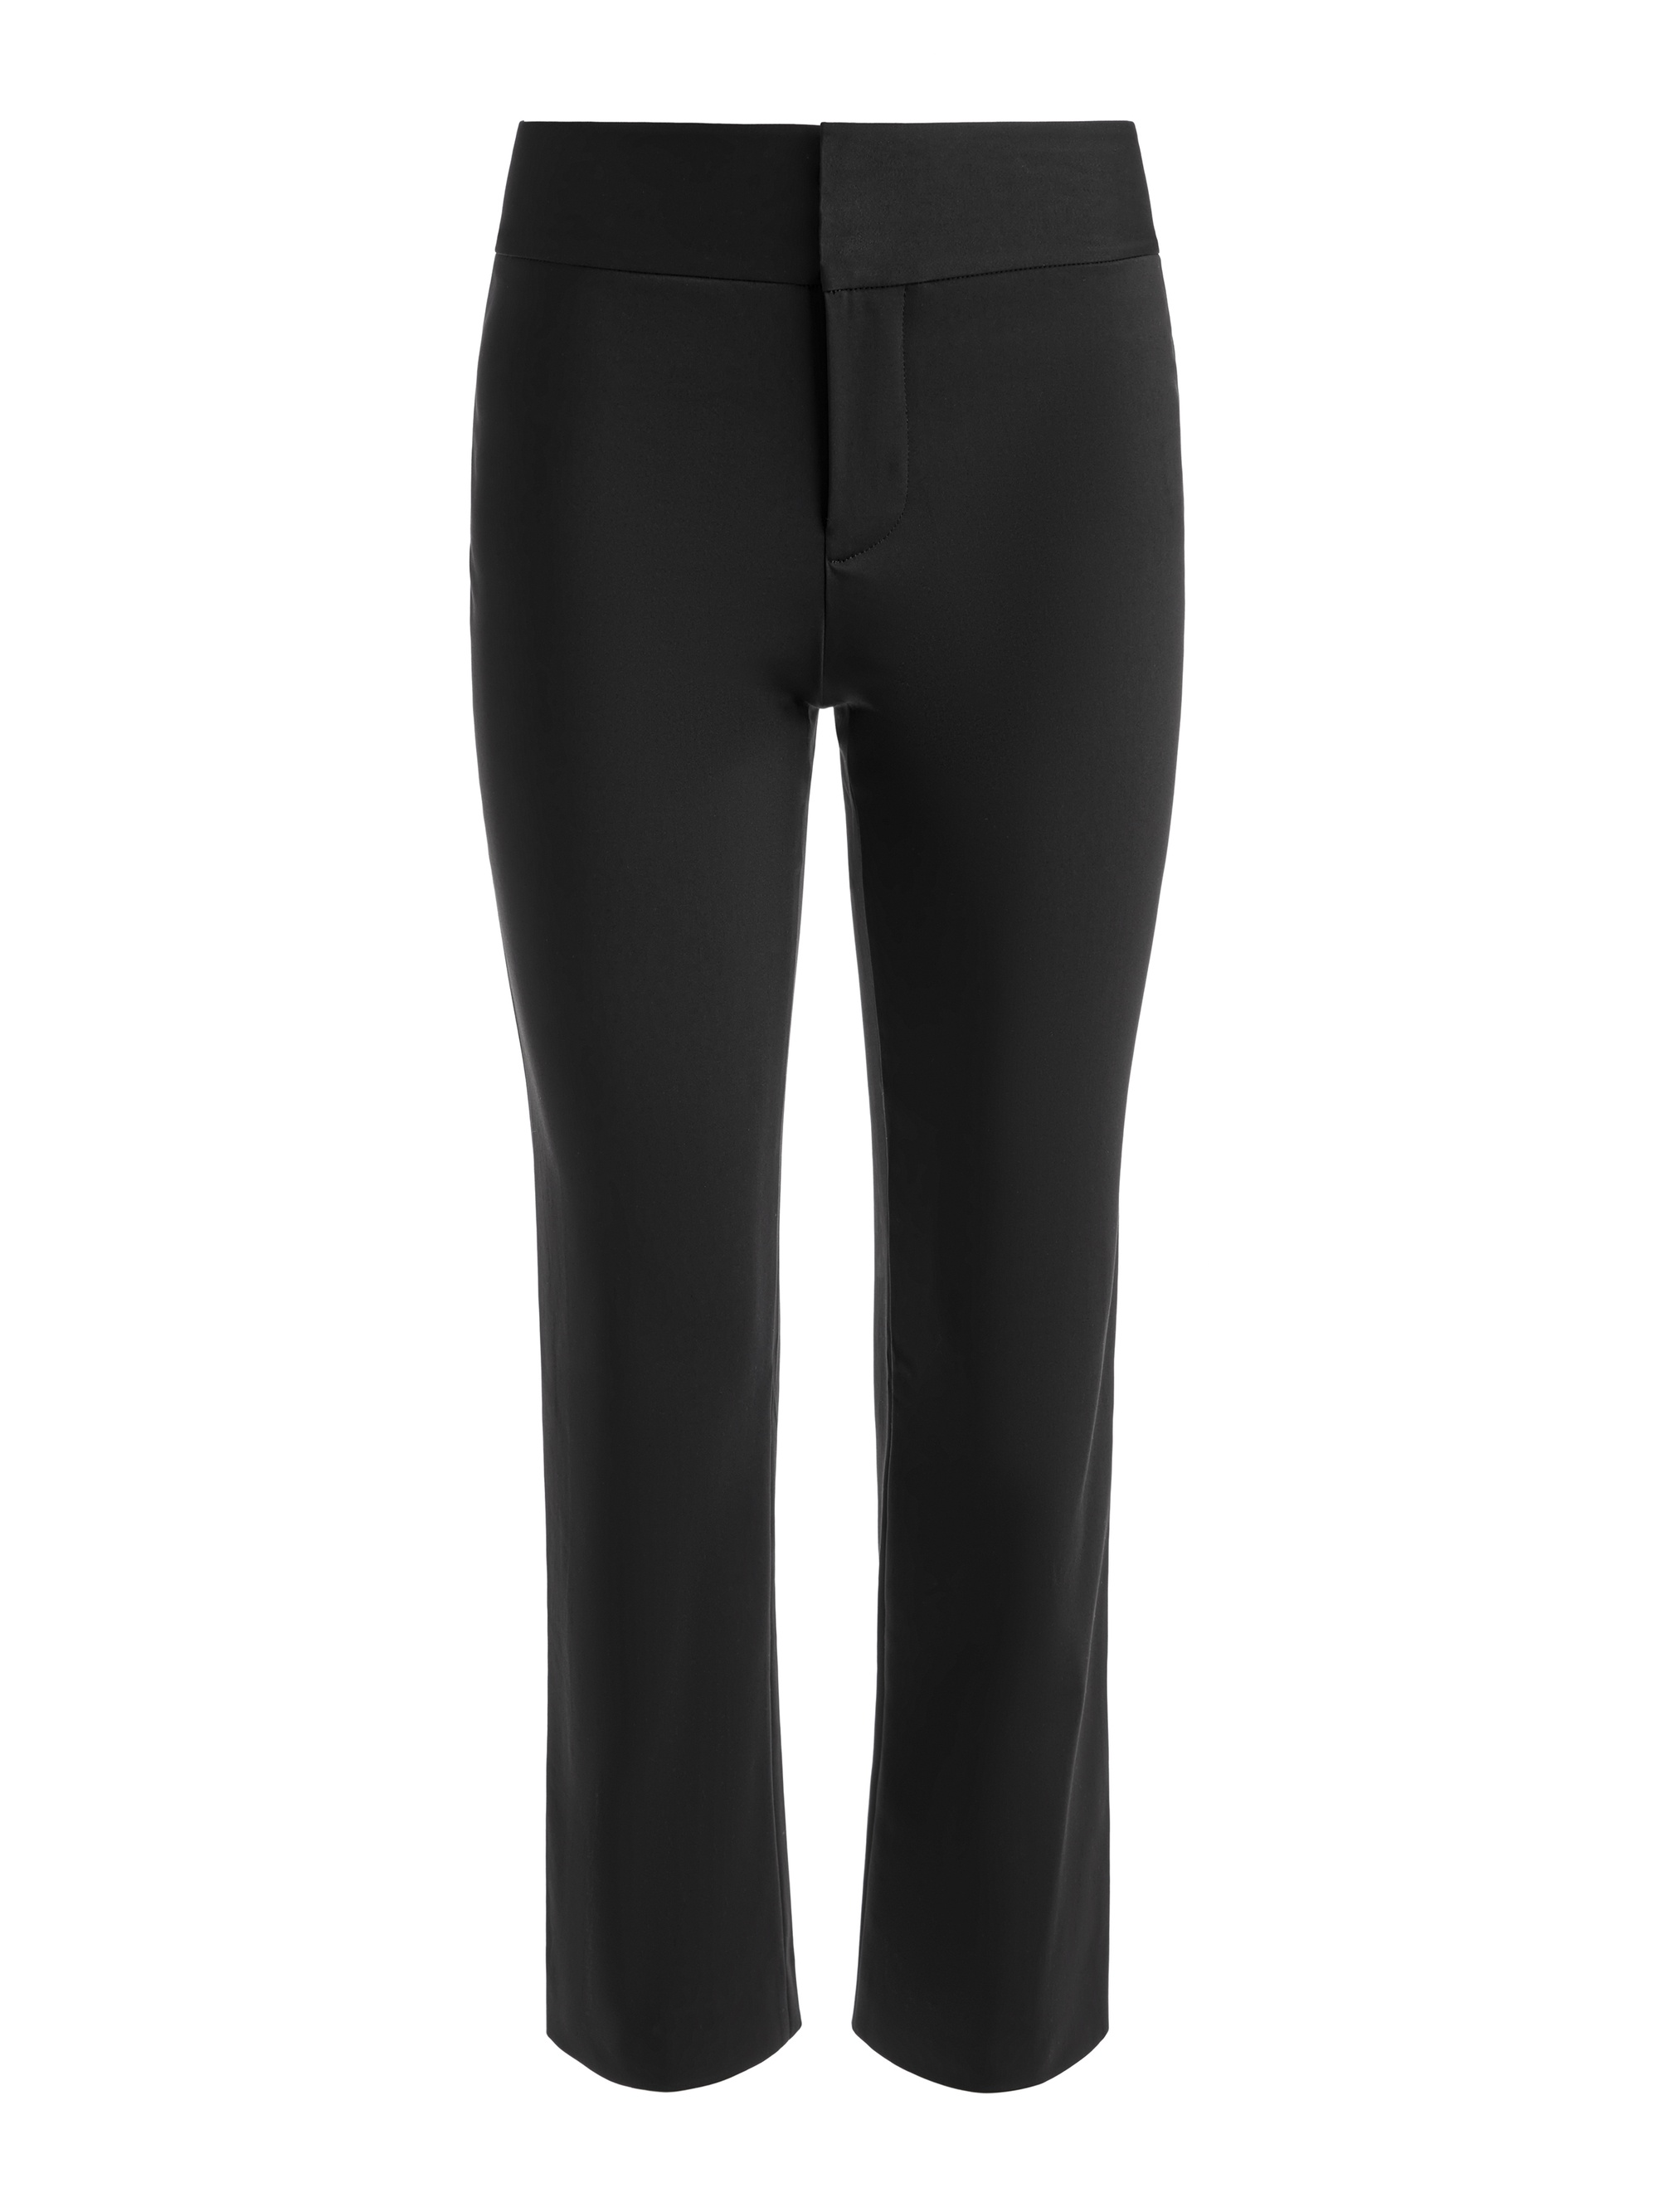 STACEY LOW RISE KICK FLARE PANT - 1